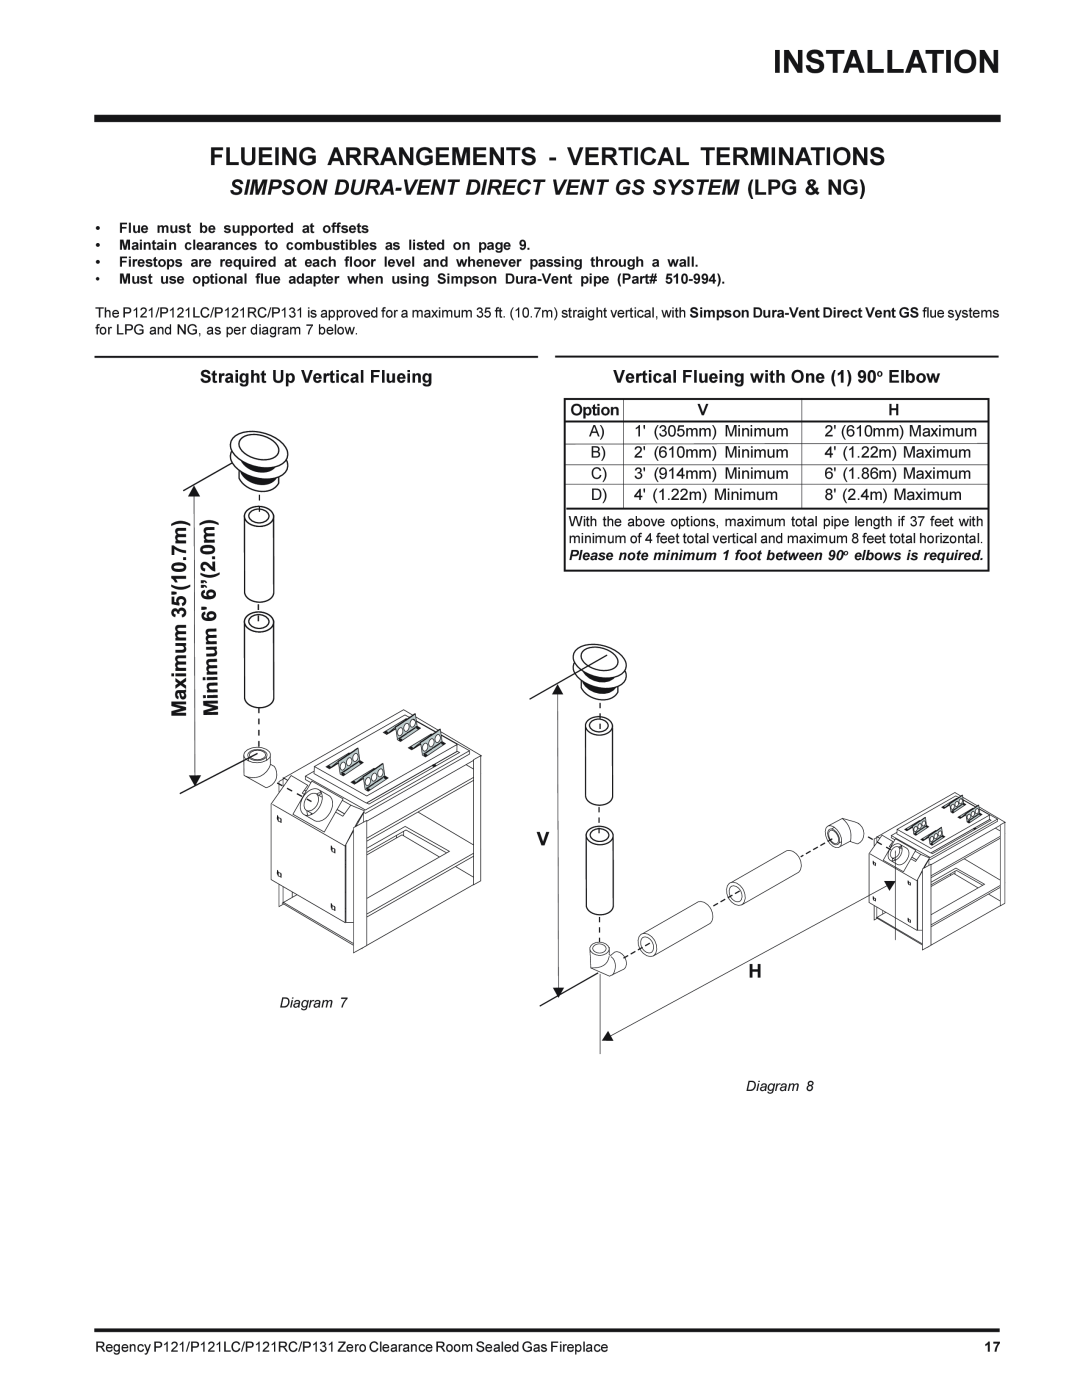 Regency P121LC-NG, P131-NG Flueing Arrangements - Vertical Terminations, Simpson Dura-Ventdirect Vent Gs System Lpg & Ng 